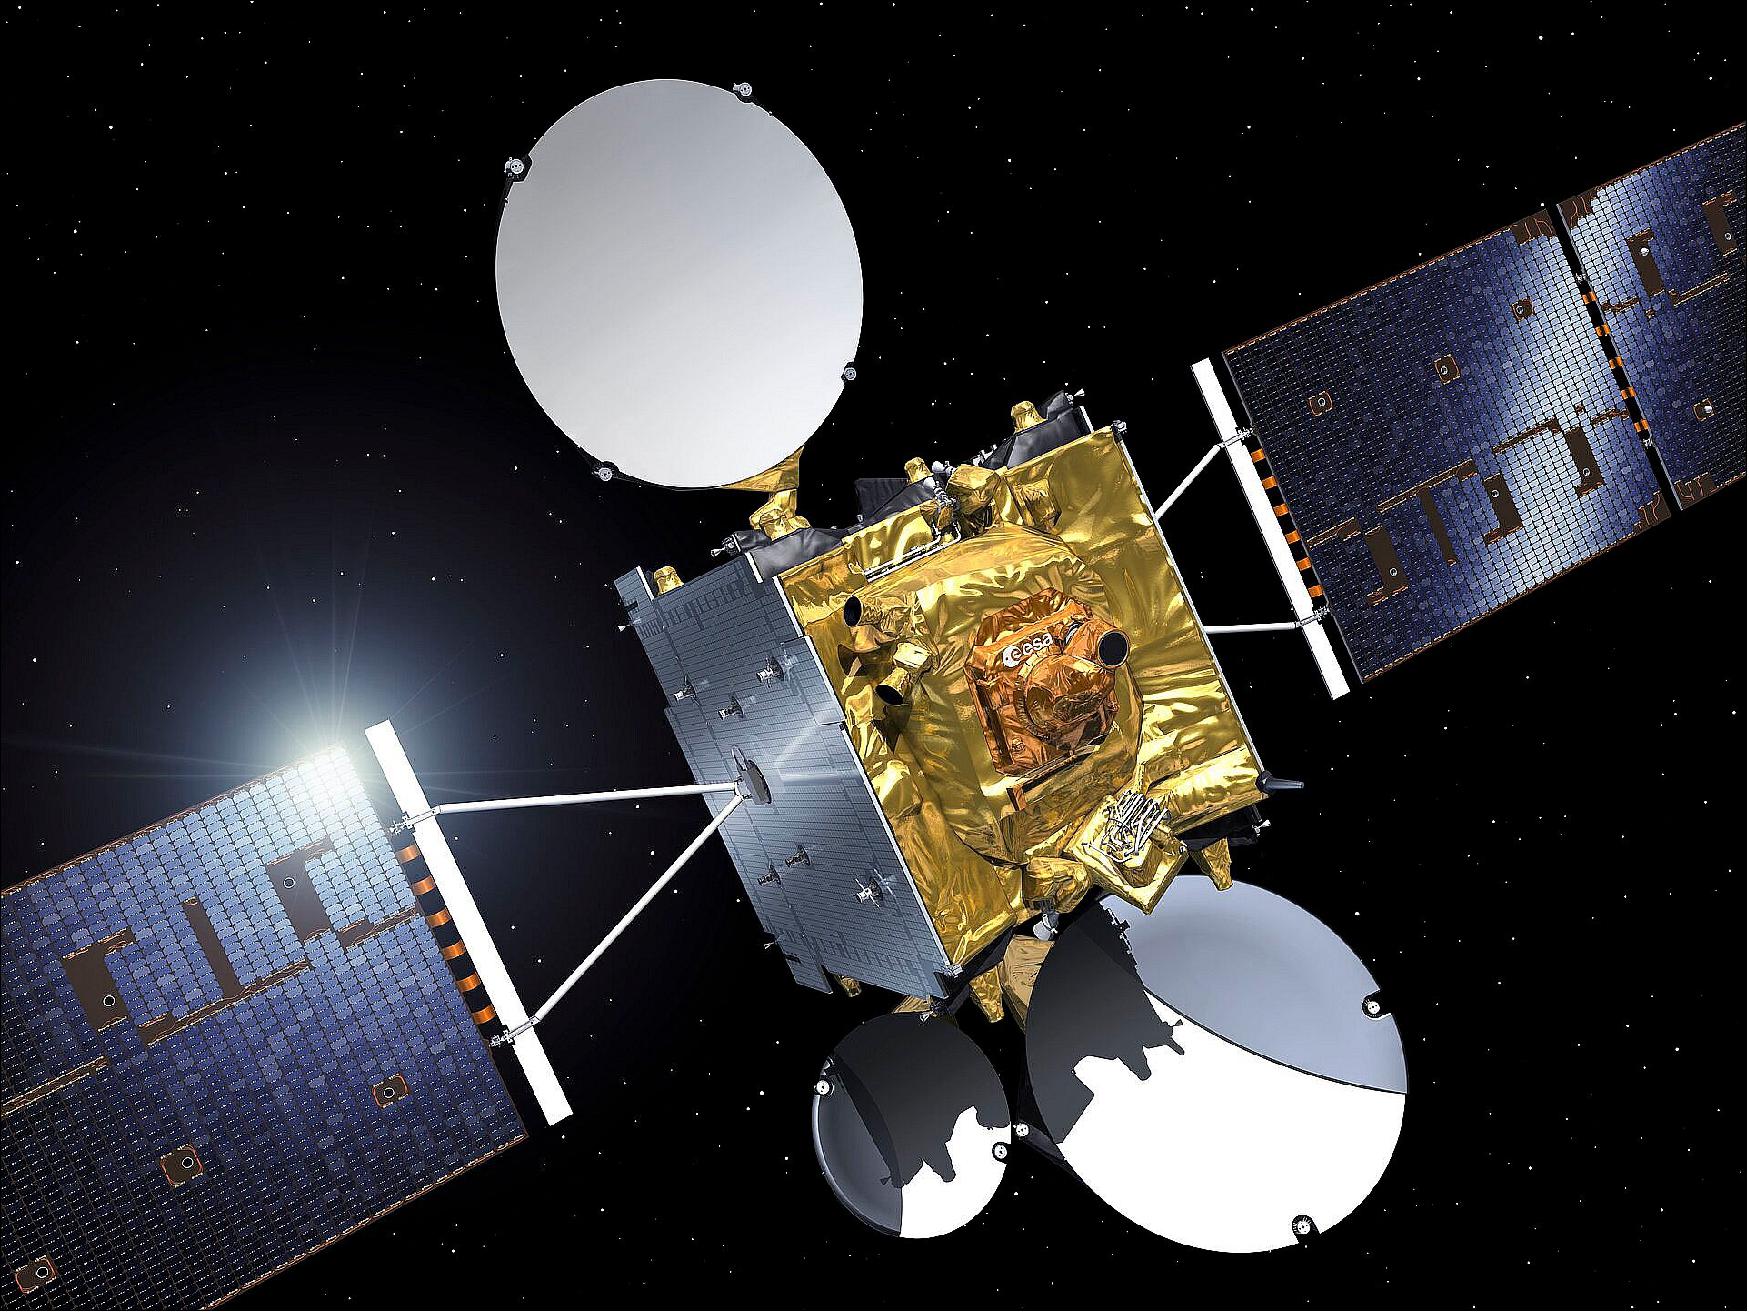 Figure 12: EDRS-C is the second node of the European Data Relay System (EDRS). It is designed to transmit data between low Earth orbiting satellites and the EDRS payloads in geostationary orbit using innovative laser communication technology (image credit: ESA)